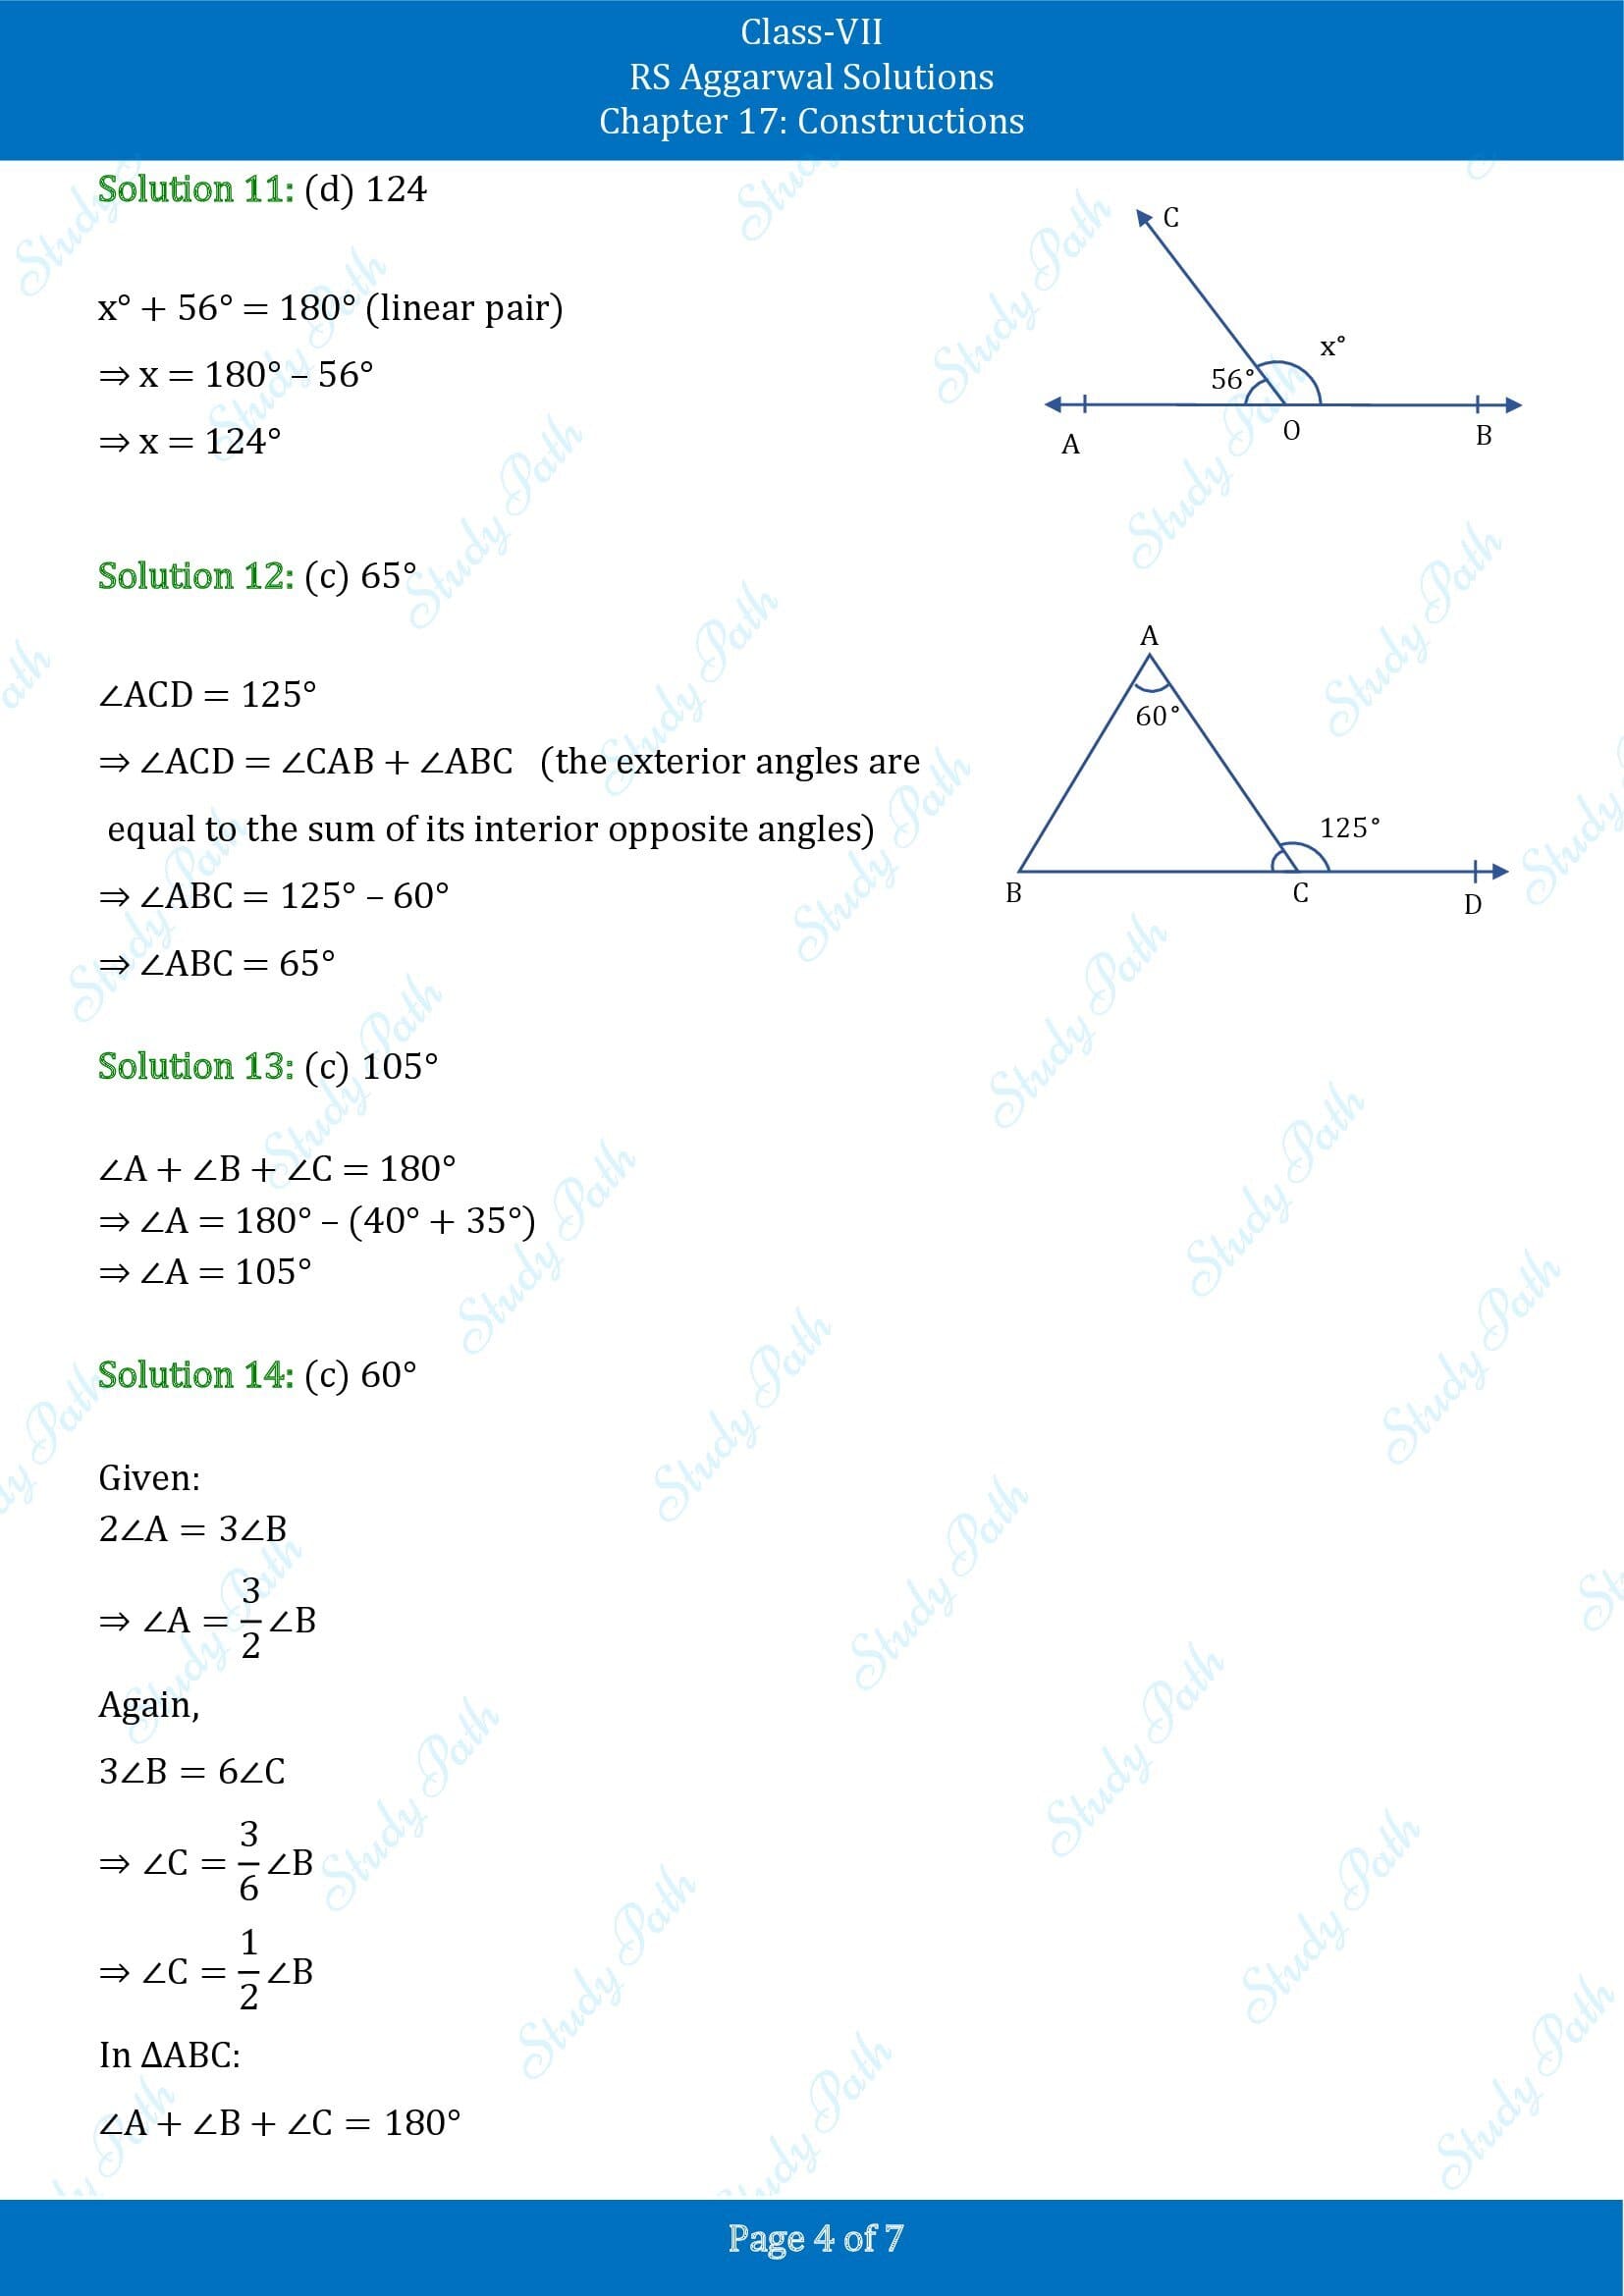 RS Aggarwal Solutions Class 7 Chapter 17 Constructions Test Paper 00004